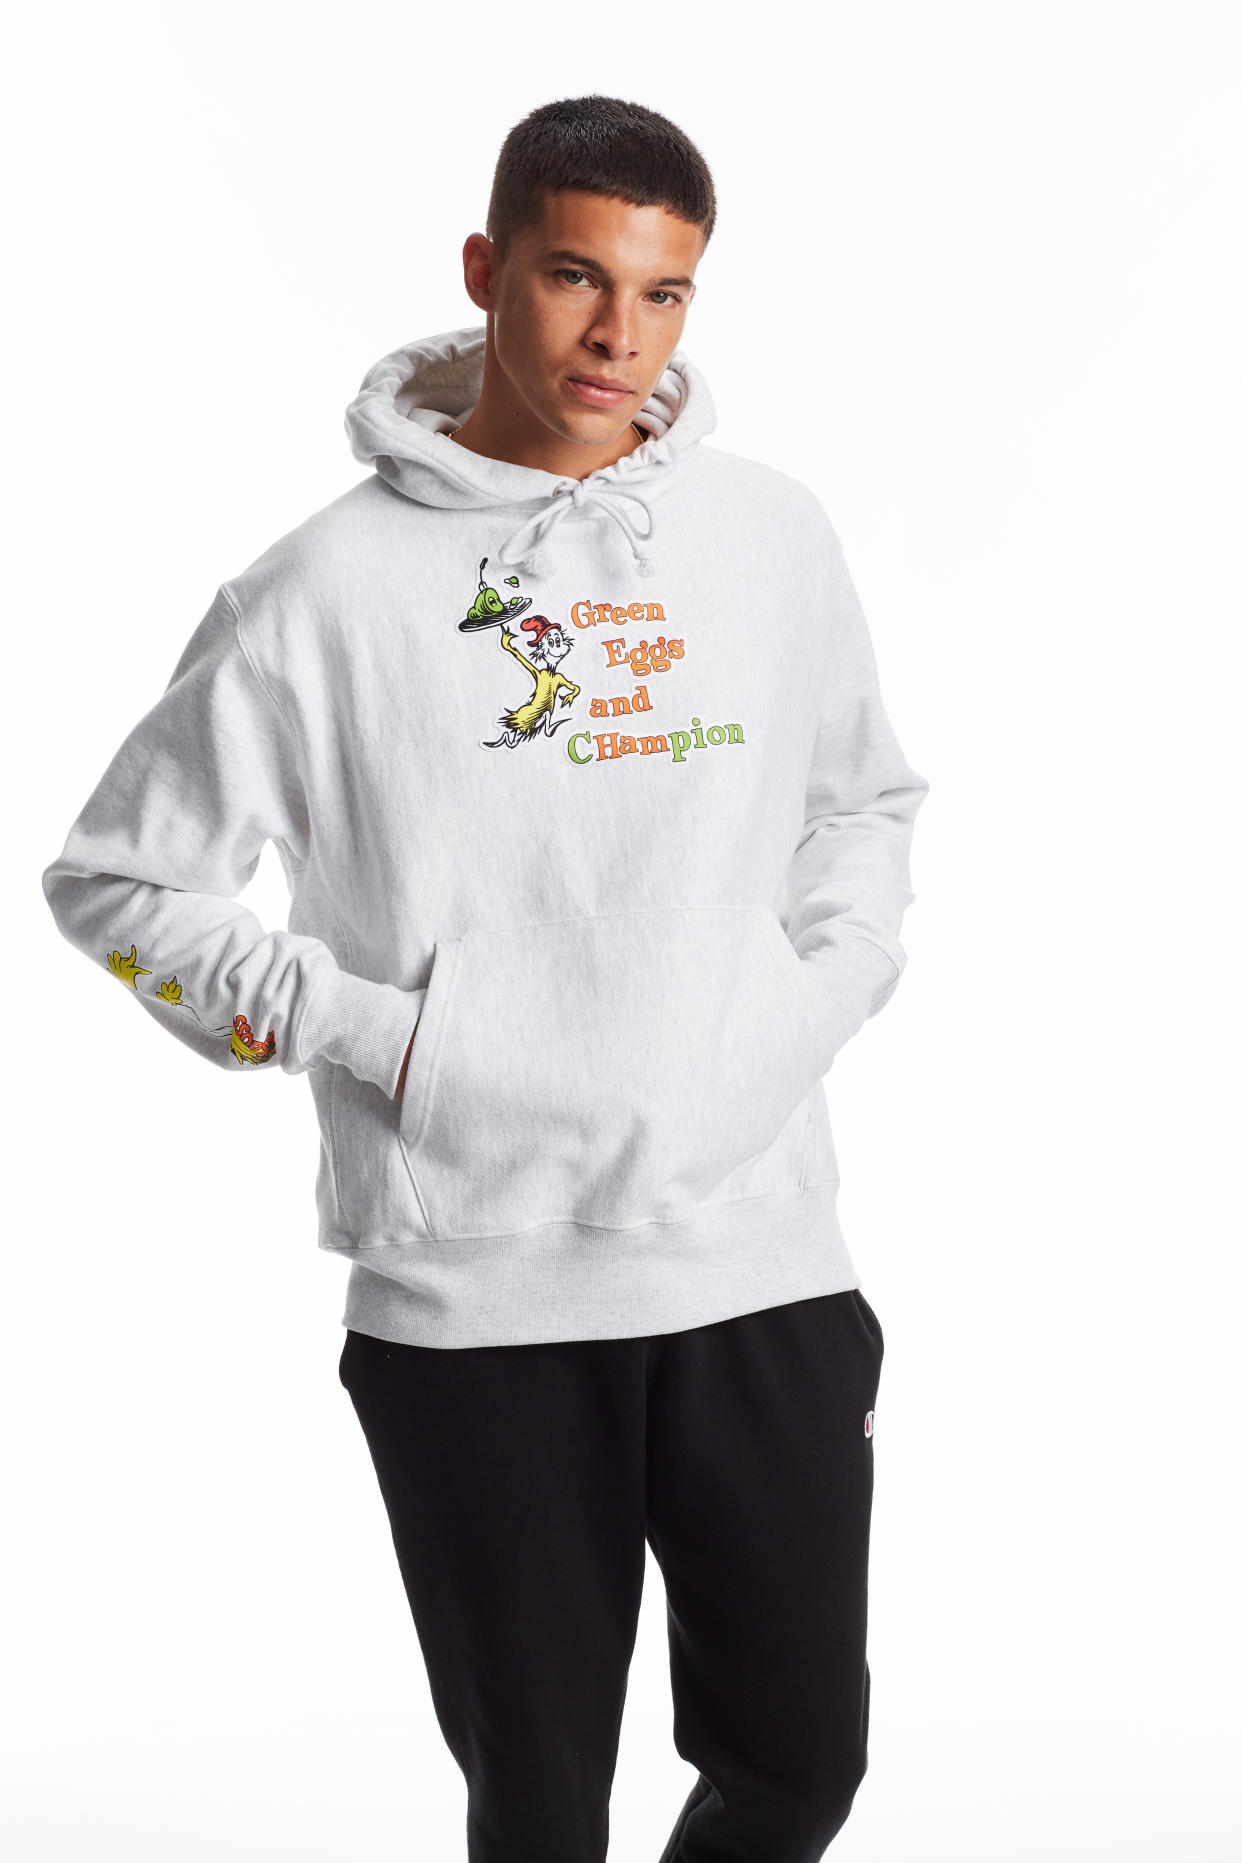 Champion Athleticwear launches limited-edition Dr. Seuss hoodies, t ...